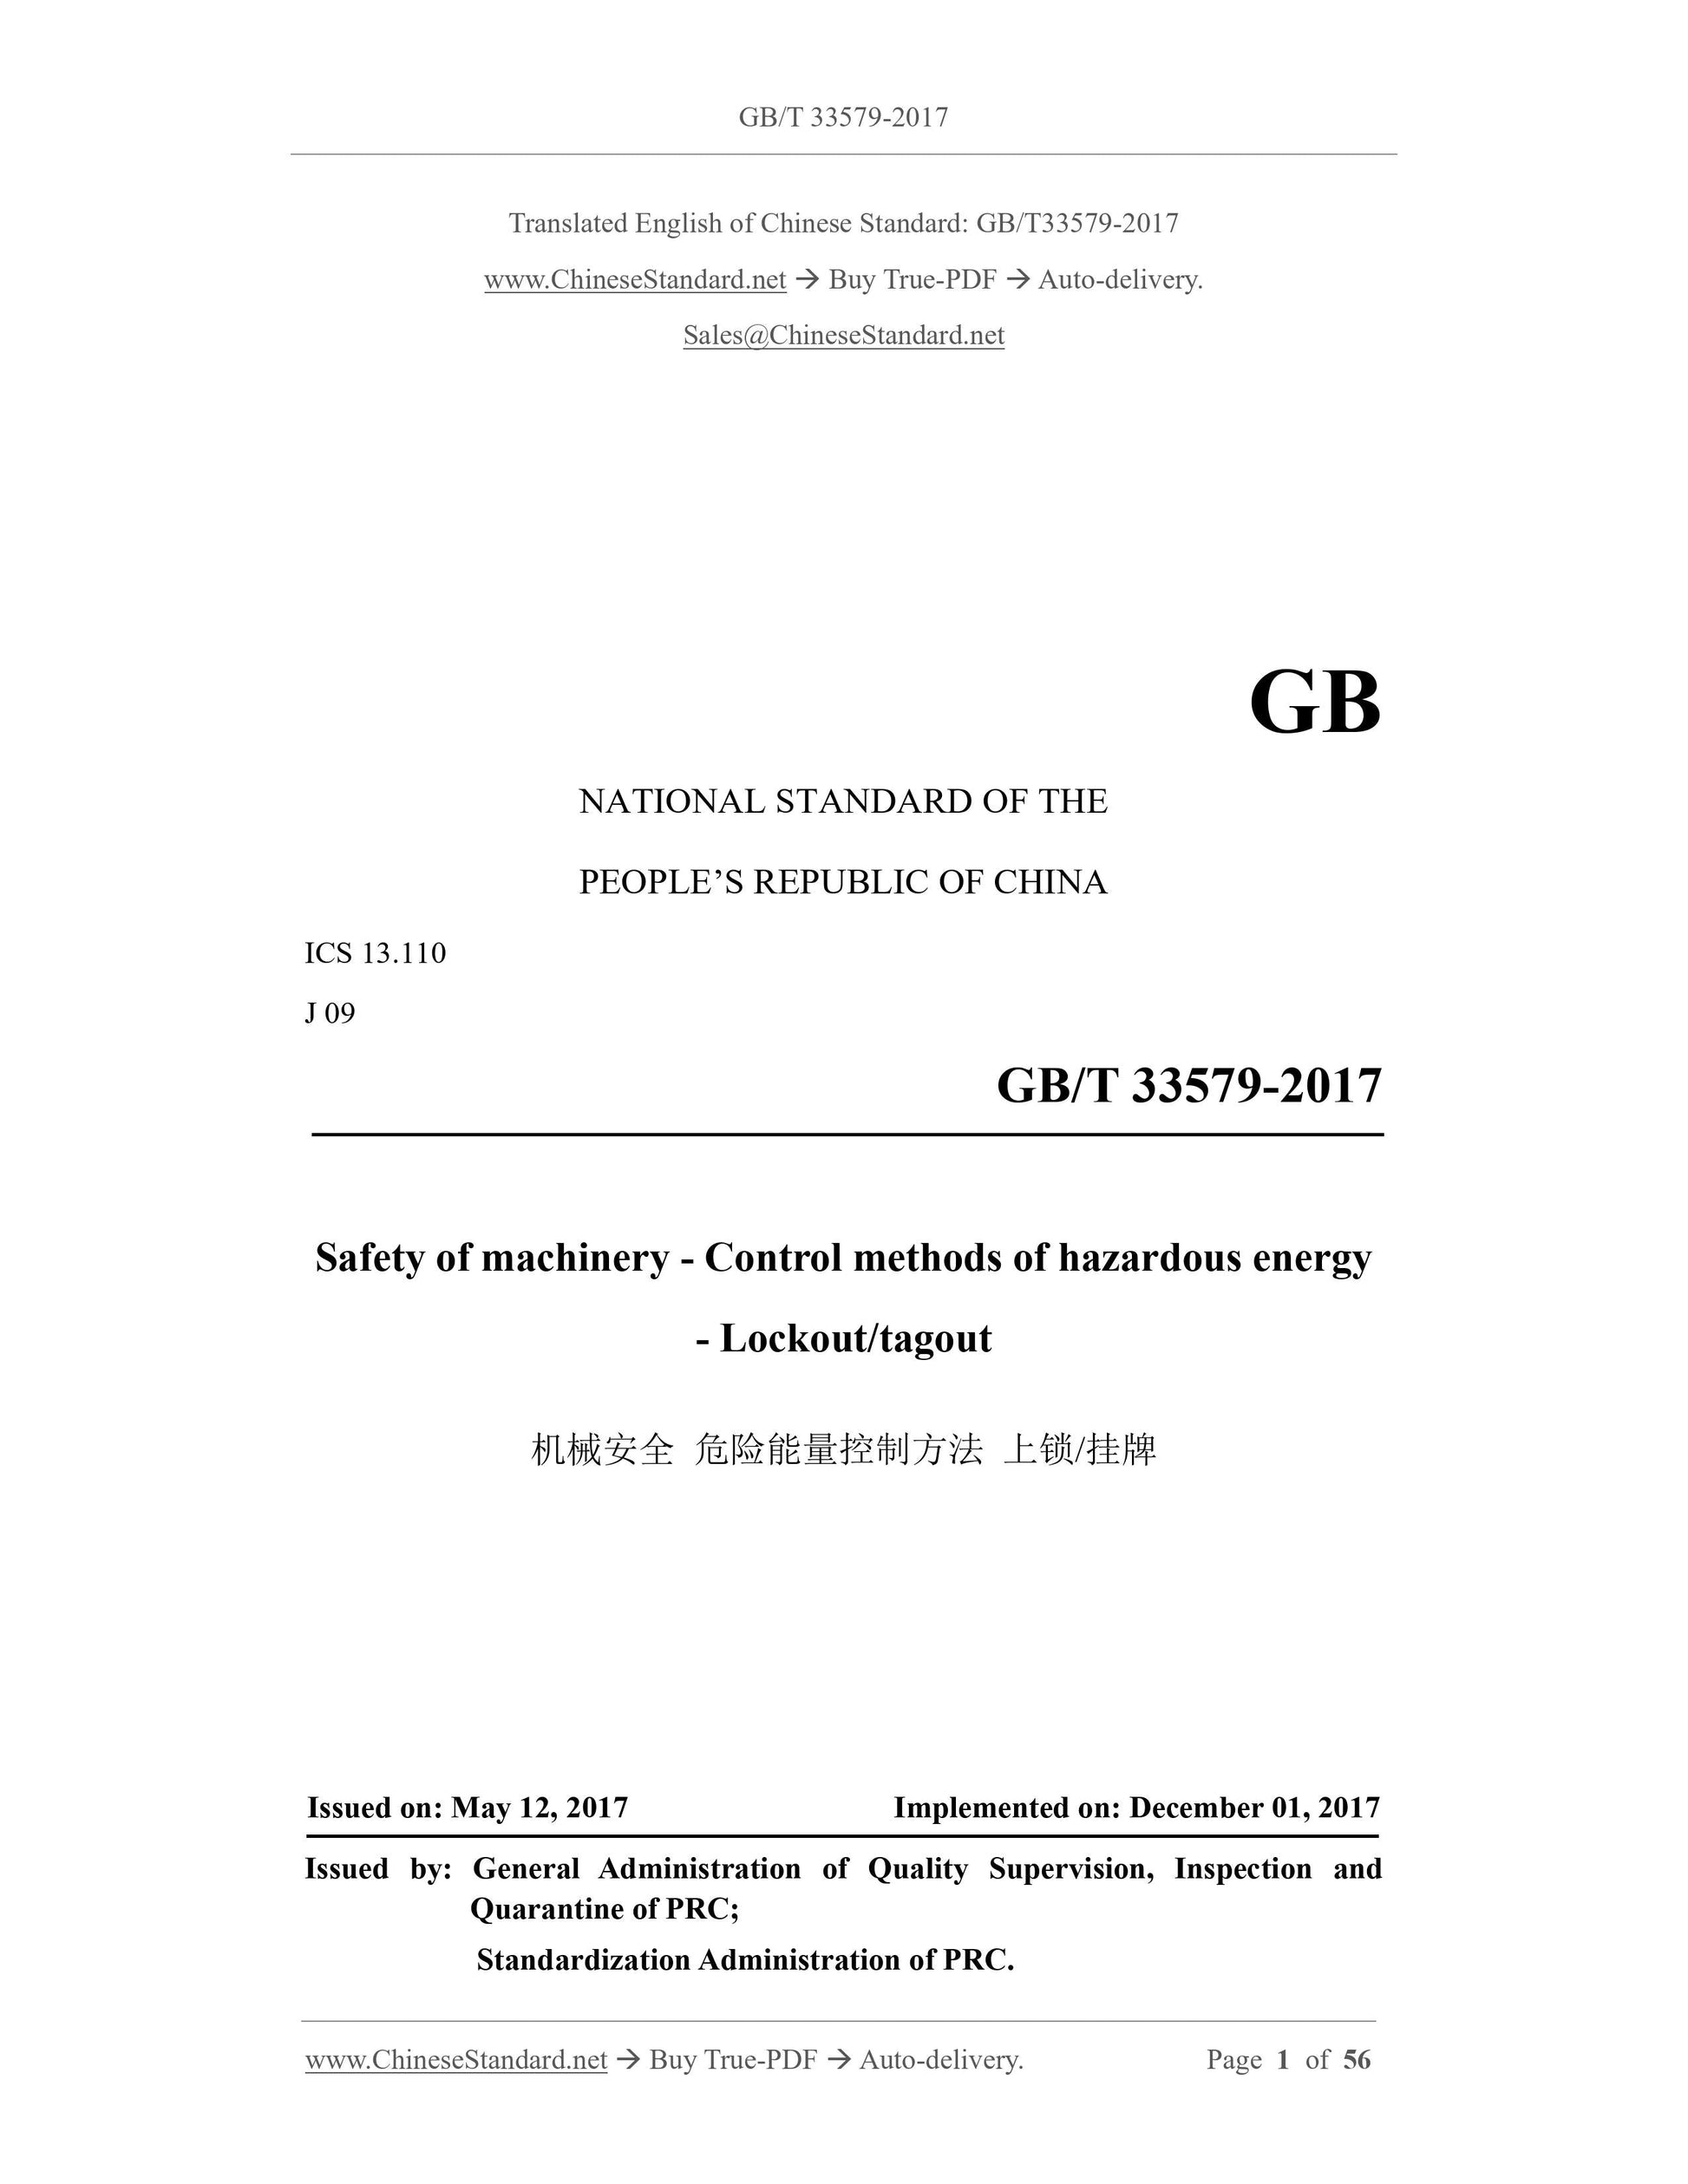 GB/T 33579-2017 Page 1